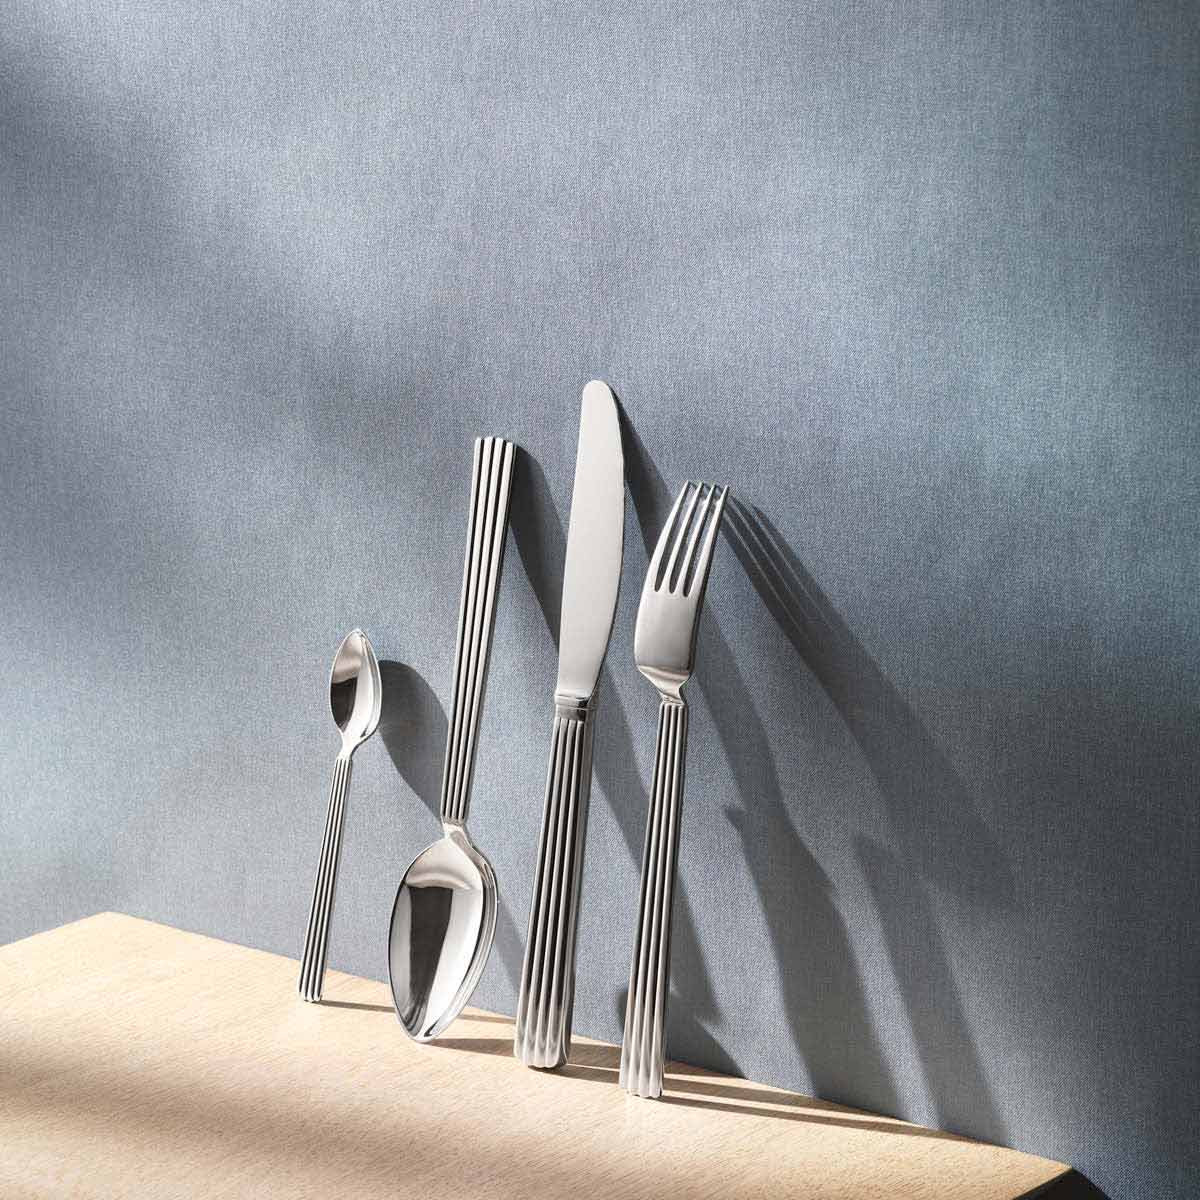 18 Lovely Georg Jensen Living Vase 2024 free download georg jensen living vase of georg jensen iconic scandinavian design from denmark since 1904 intended for bernadotte cutlery set in mirror polished stainless steel